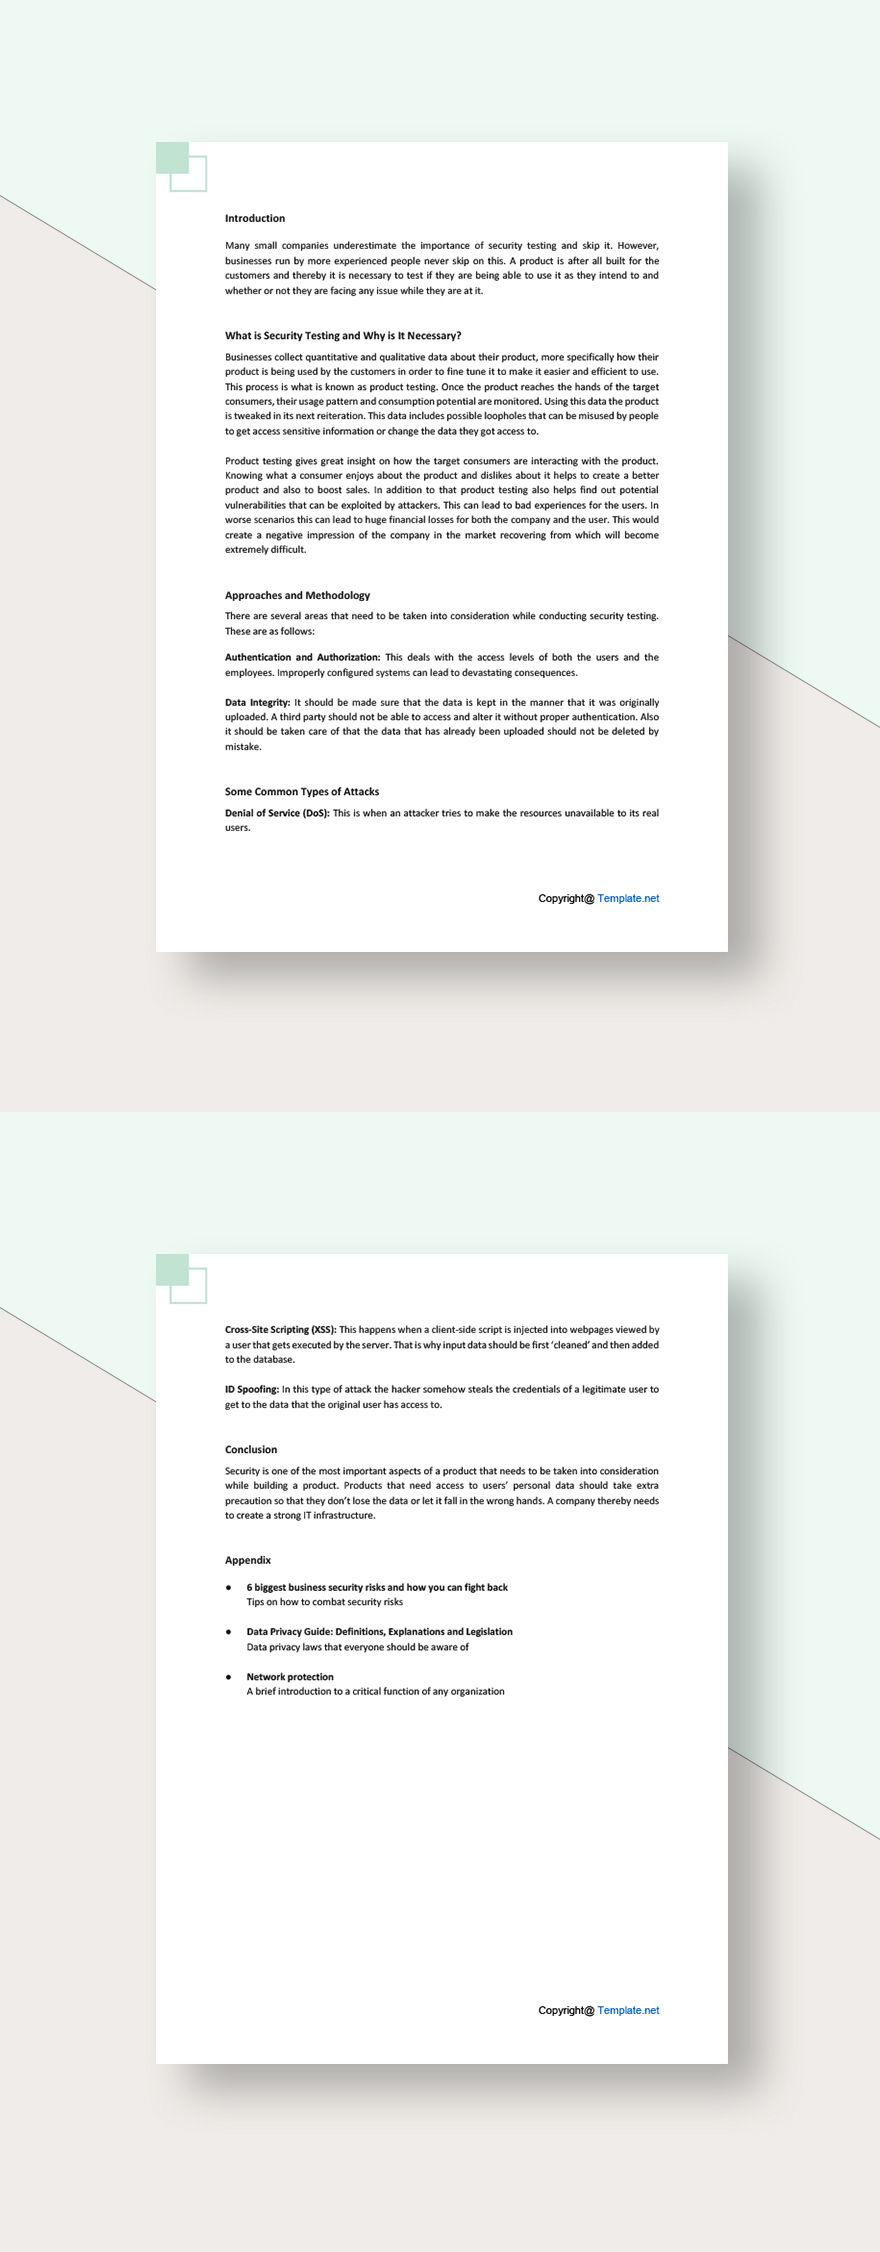 Sample Security White Paper Template